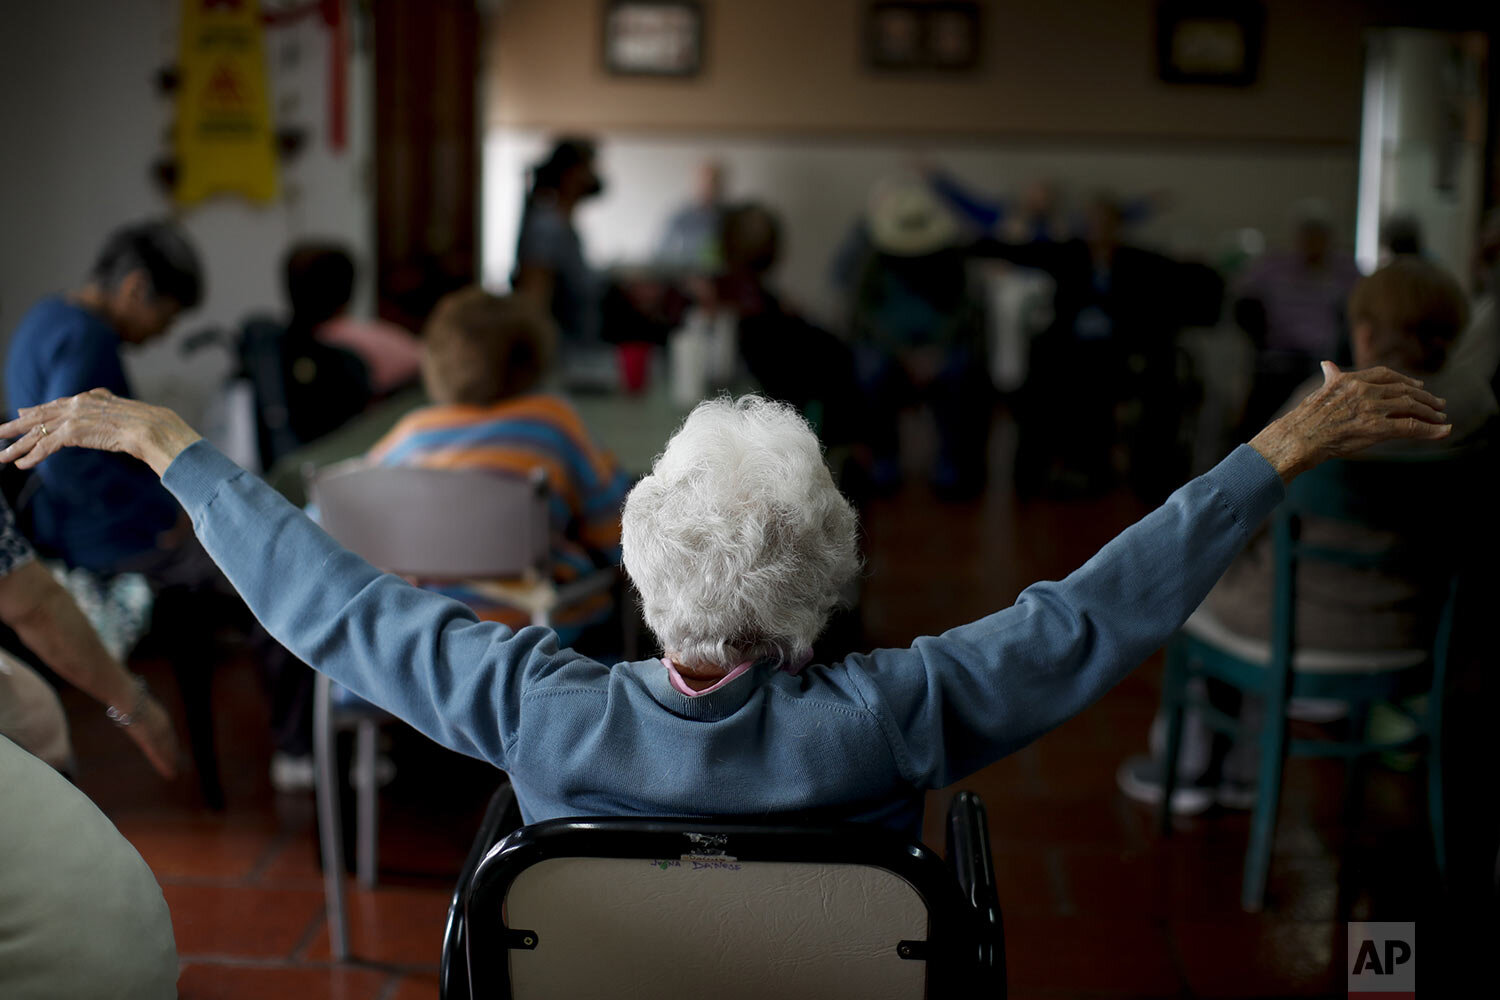  Delia Solbach attends an exercise class at the Reminiscencias residence for the elderly in Tandil, Argentina, Monday, April 5, 2021. (AP Photo/Natacha Pisarenko) 